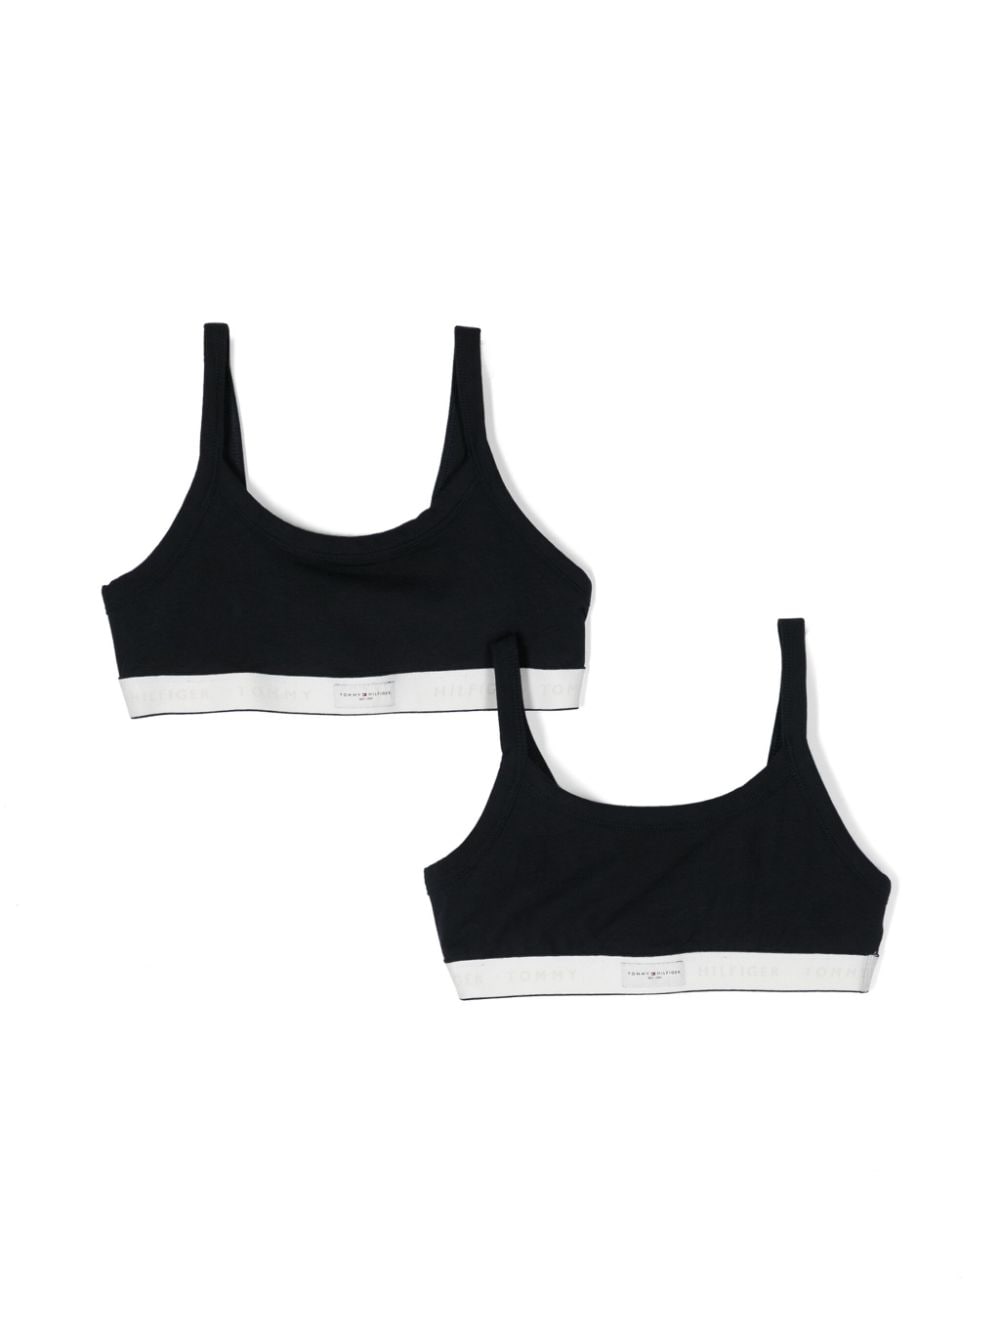 Image 1 of Tommy Hilfiger Junior logo-underband cotton bras (pack of two)